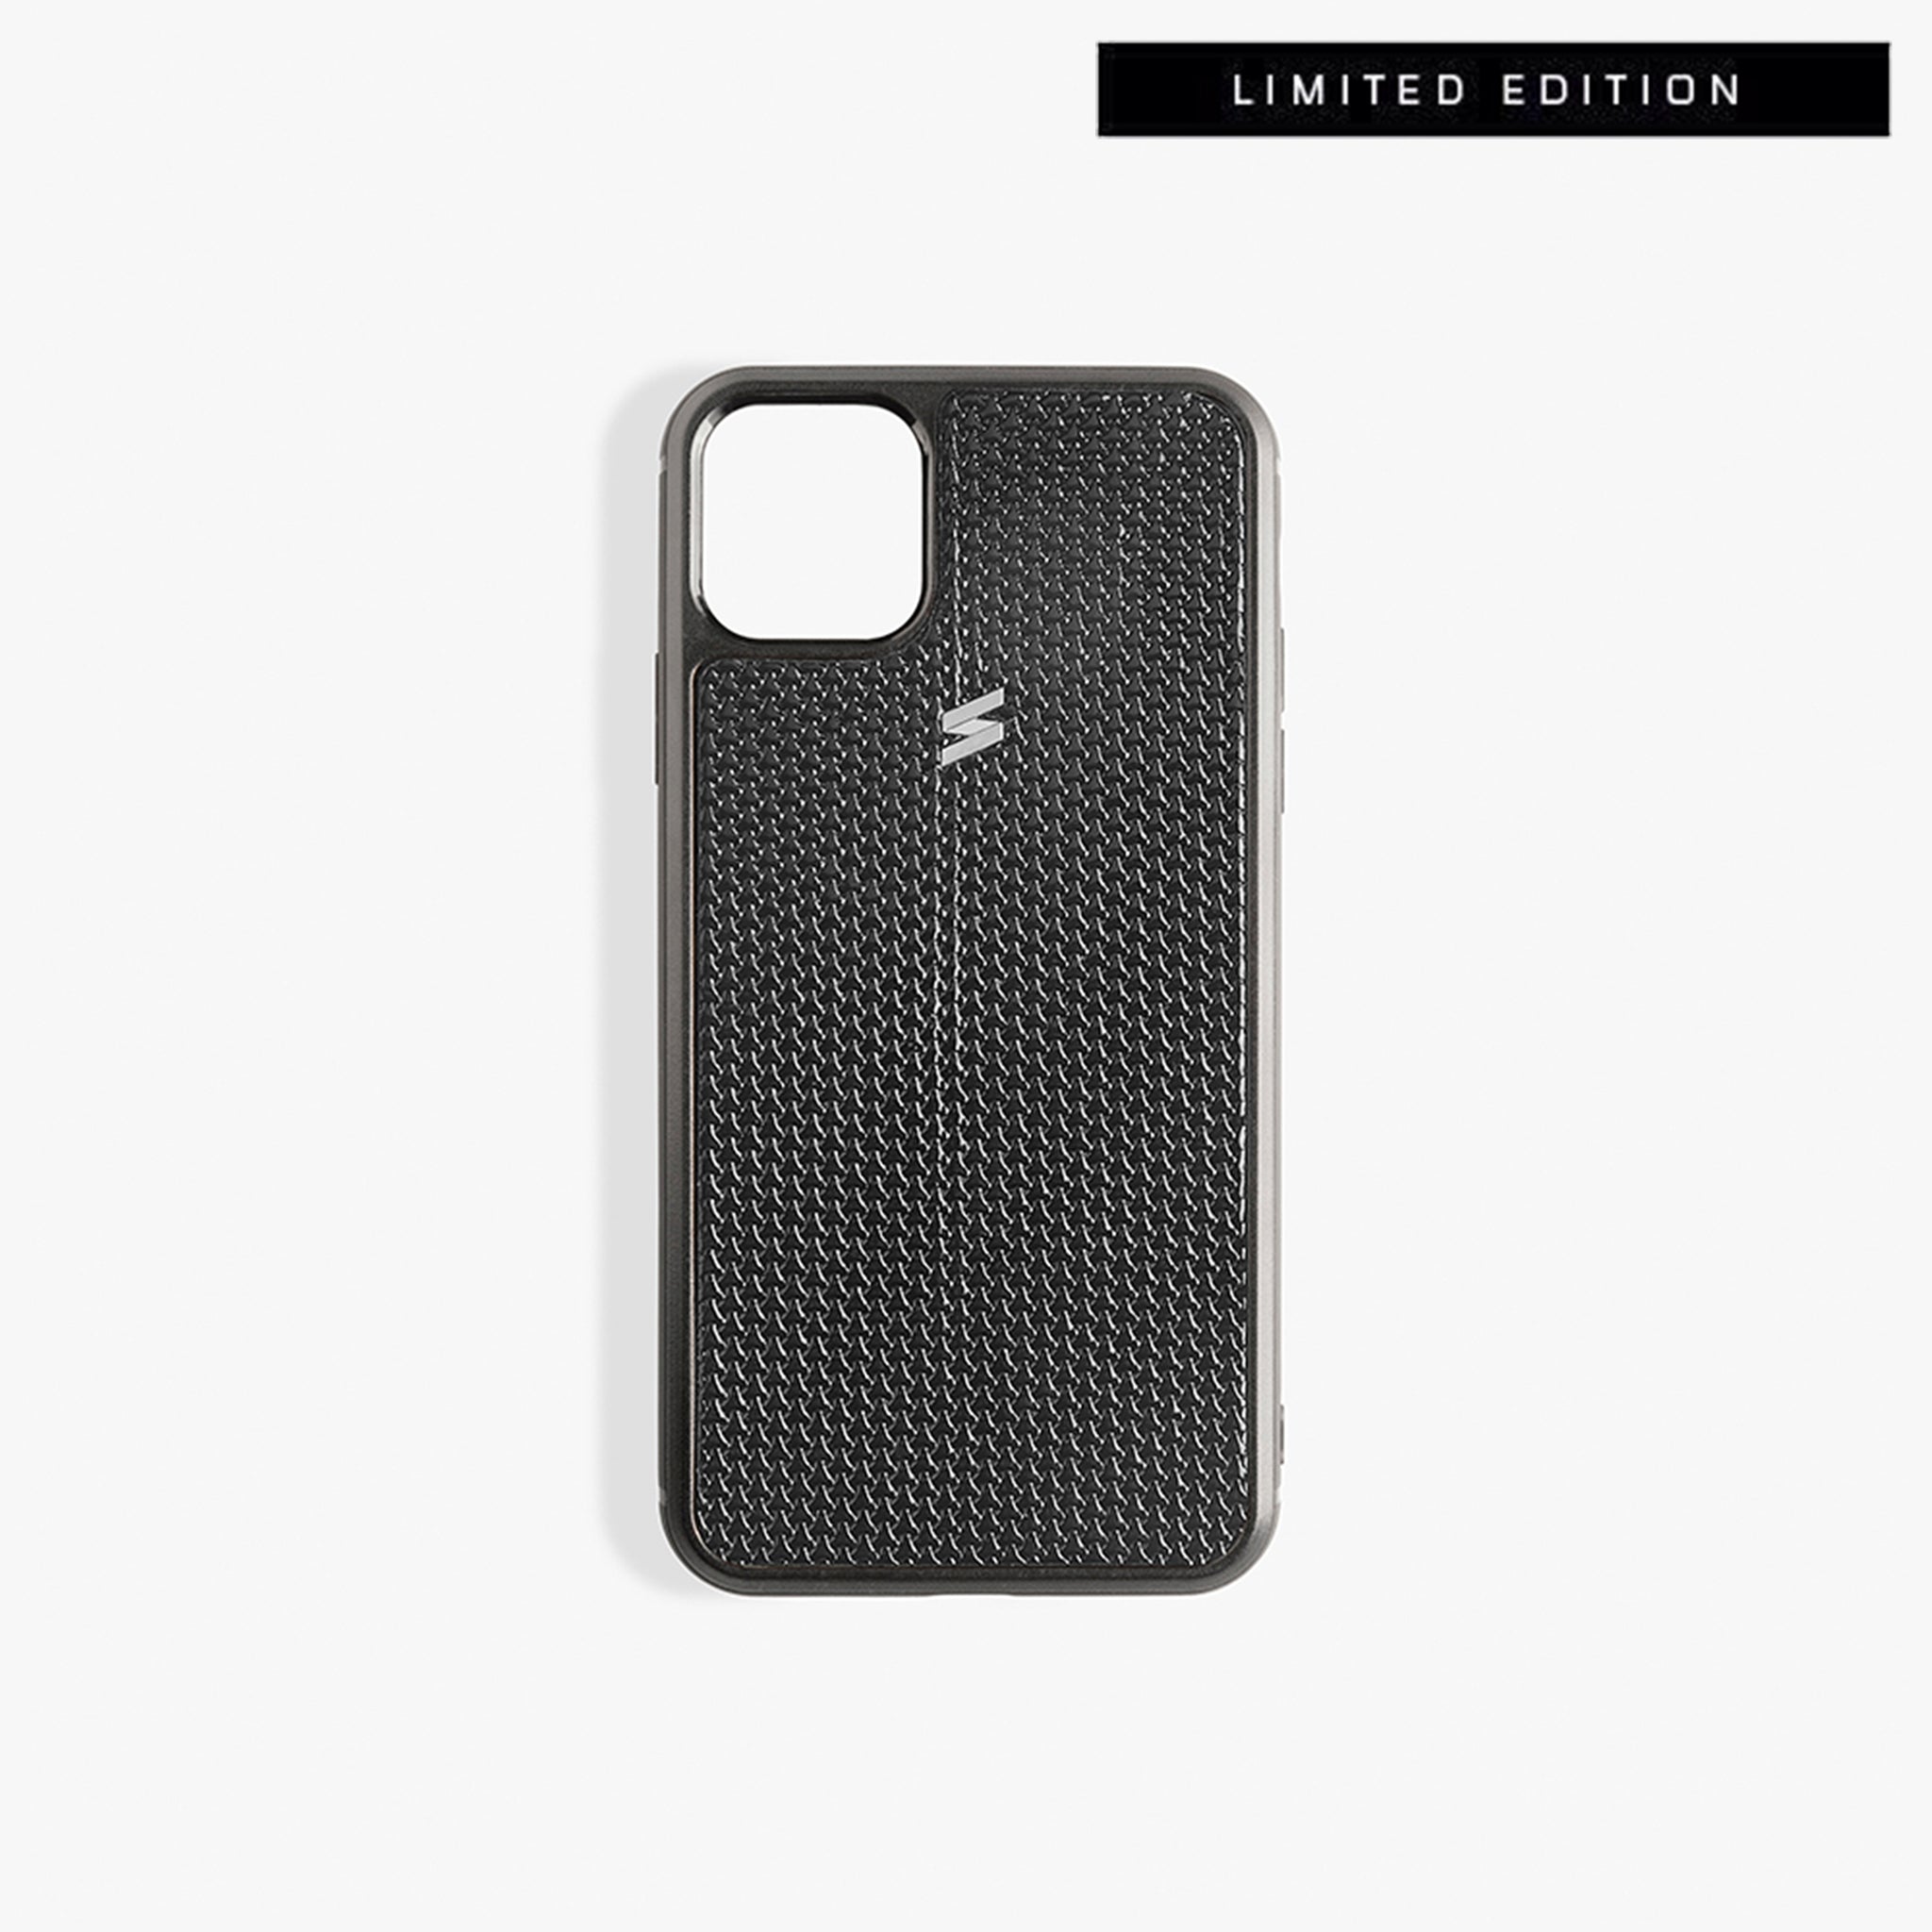 iPhone 11 Pro Cases  Limited Edition –